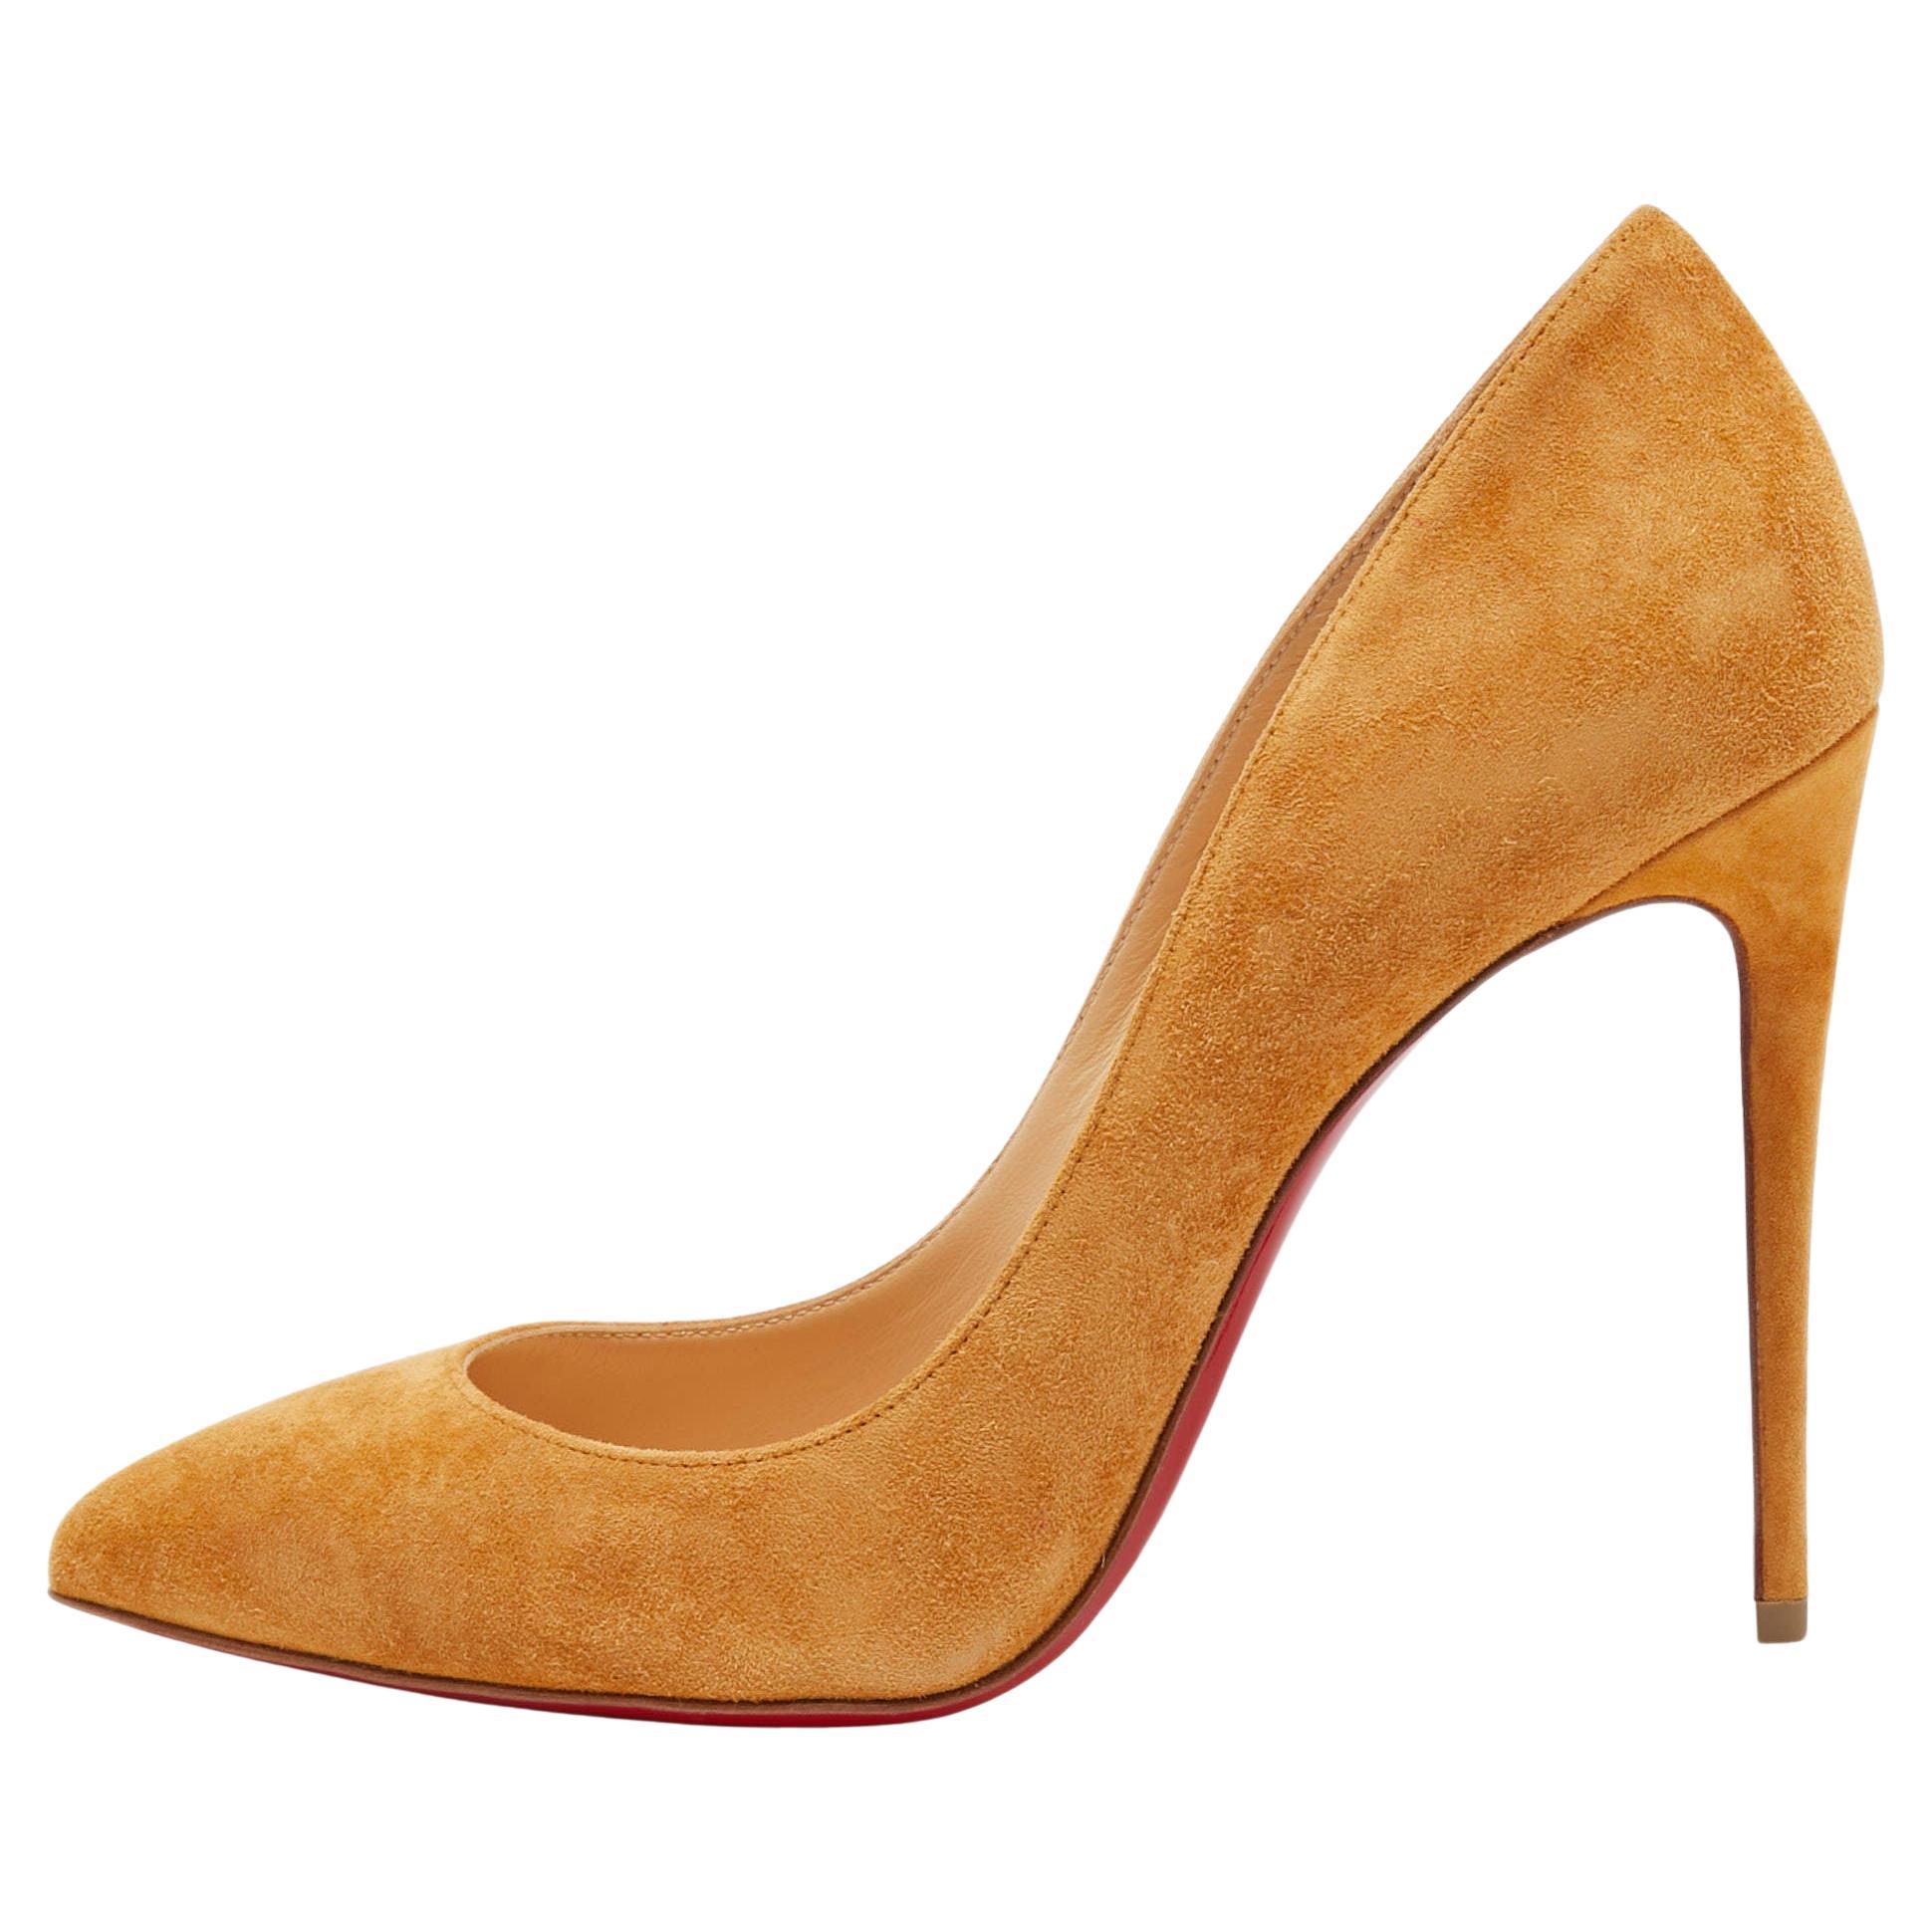 Christian Louboutin Beige Suede So Kate Pumps Size 38.5